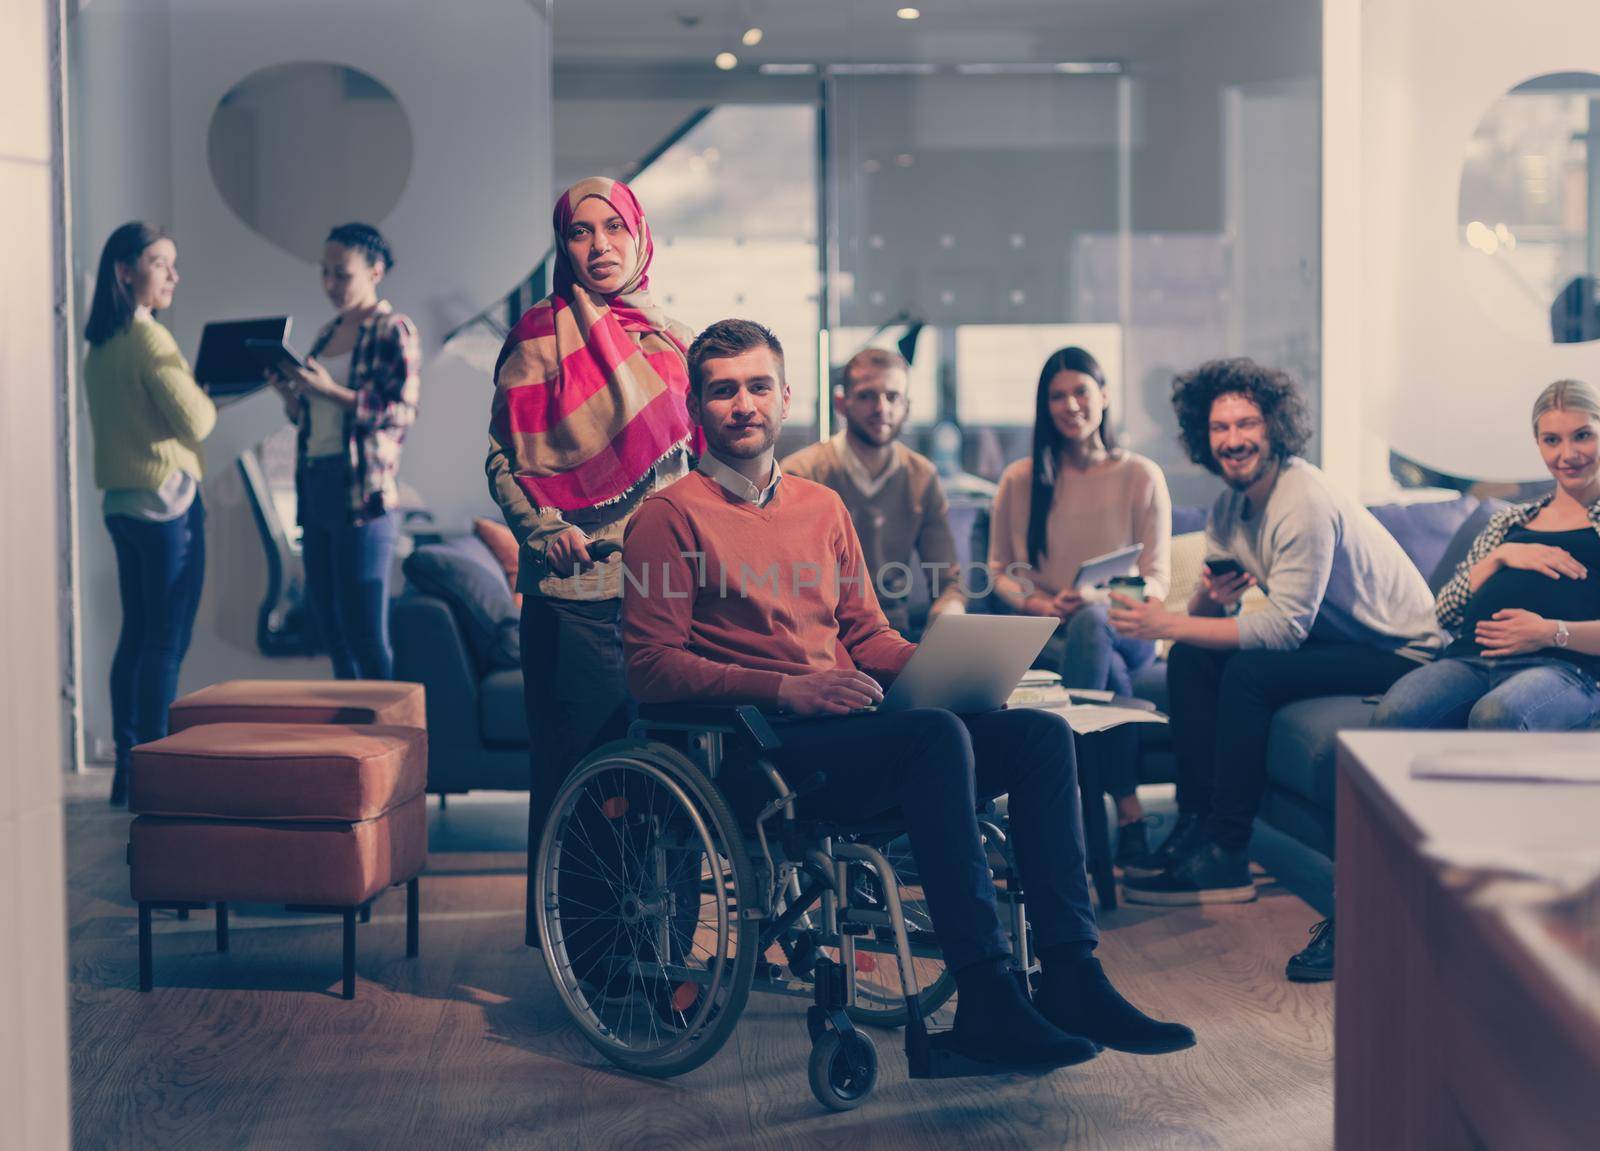 Disabled businessman in a wheelchair at work in modern open space coworking office on team meeting or brainstorming. Muslim businesswoman with hijab is assisting and helping on the project. Effective teamwork of volunteers concept in a startup business. A pregnant female coworker in the background. 